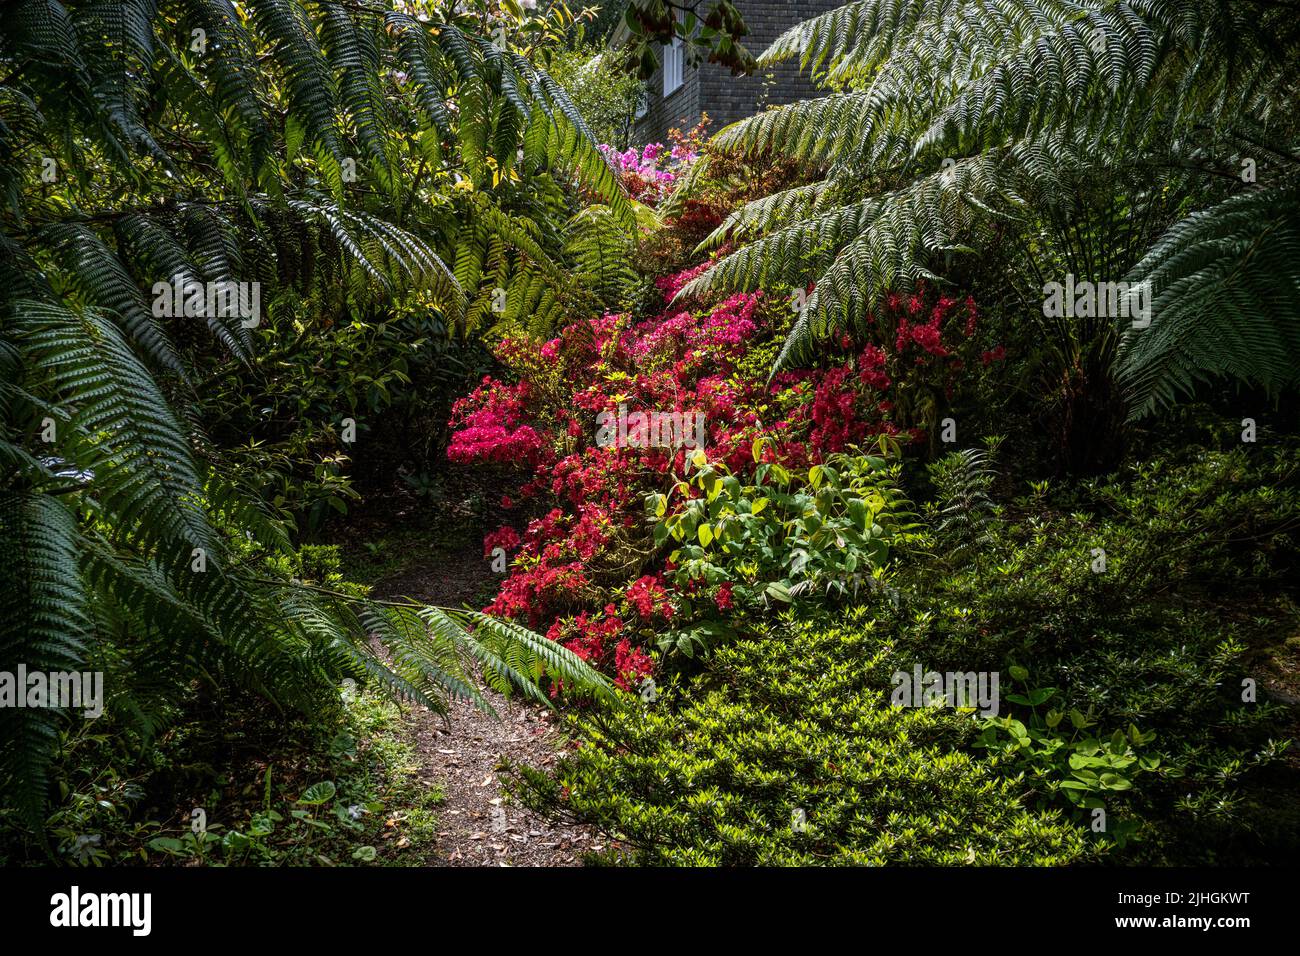 A flowering Azalea shrub and the fronds of Dicksonia antarctica growing next to a footpath in the wild sub-tropical Penjjick Garden in Cornwall.; Penj Stock Photo